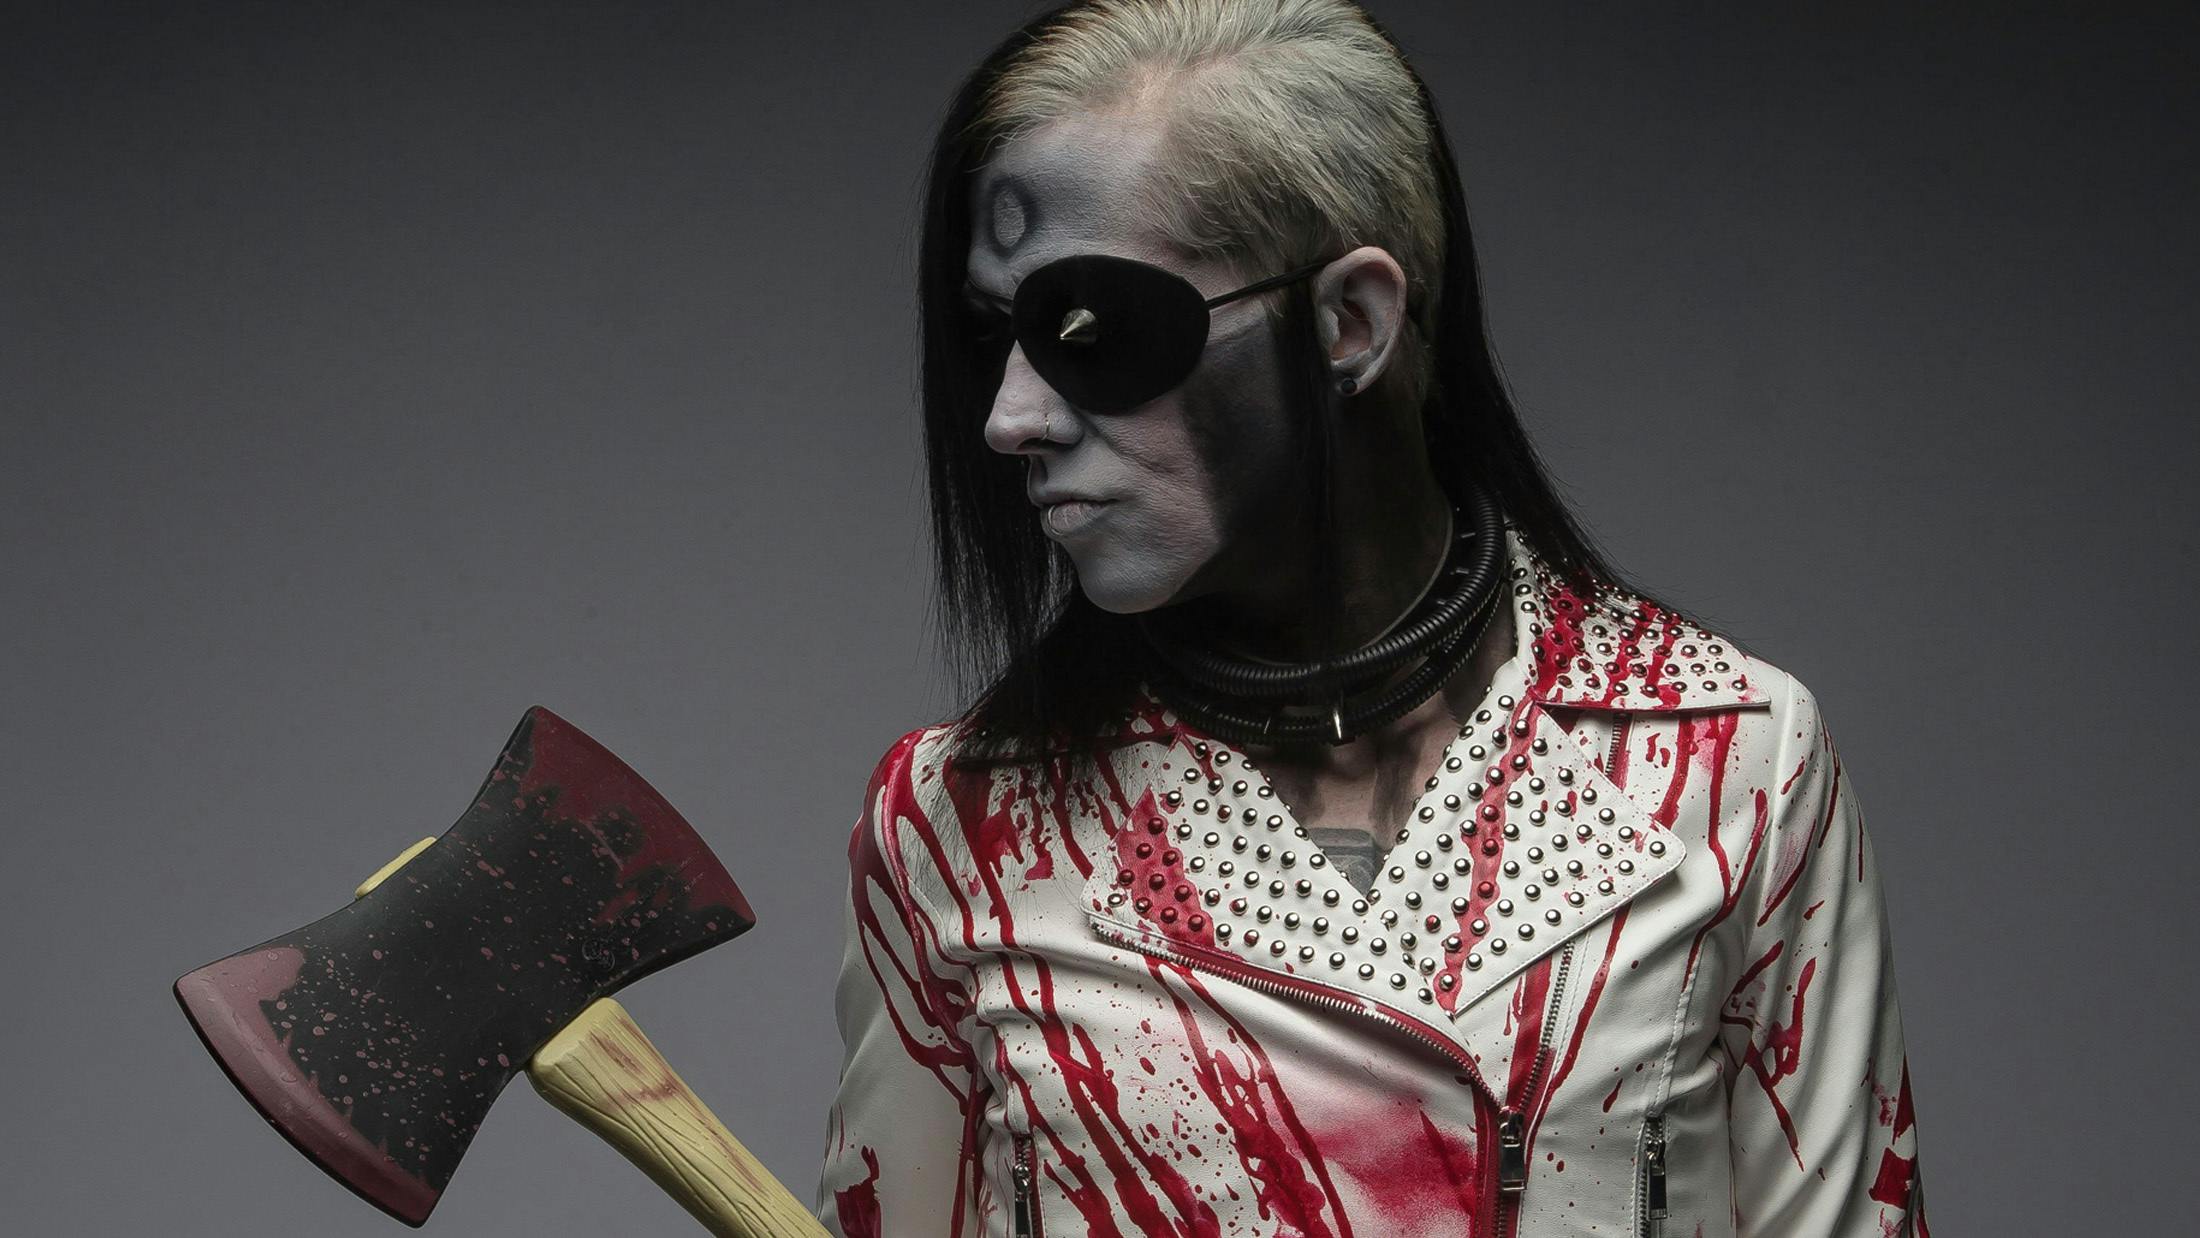 "I Think We Are Alien. Something Manipulated Our DNA": 13 Questions With Wednesday 13